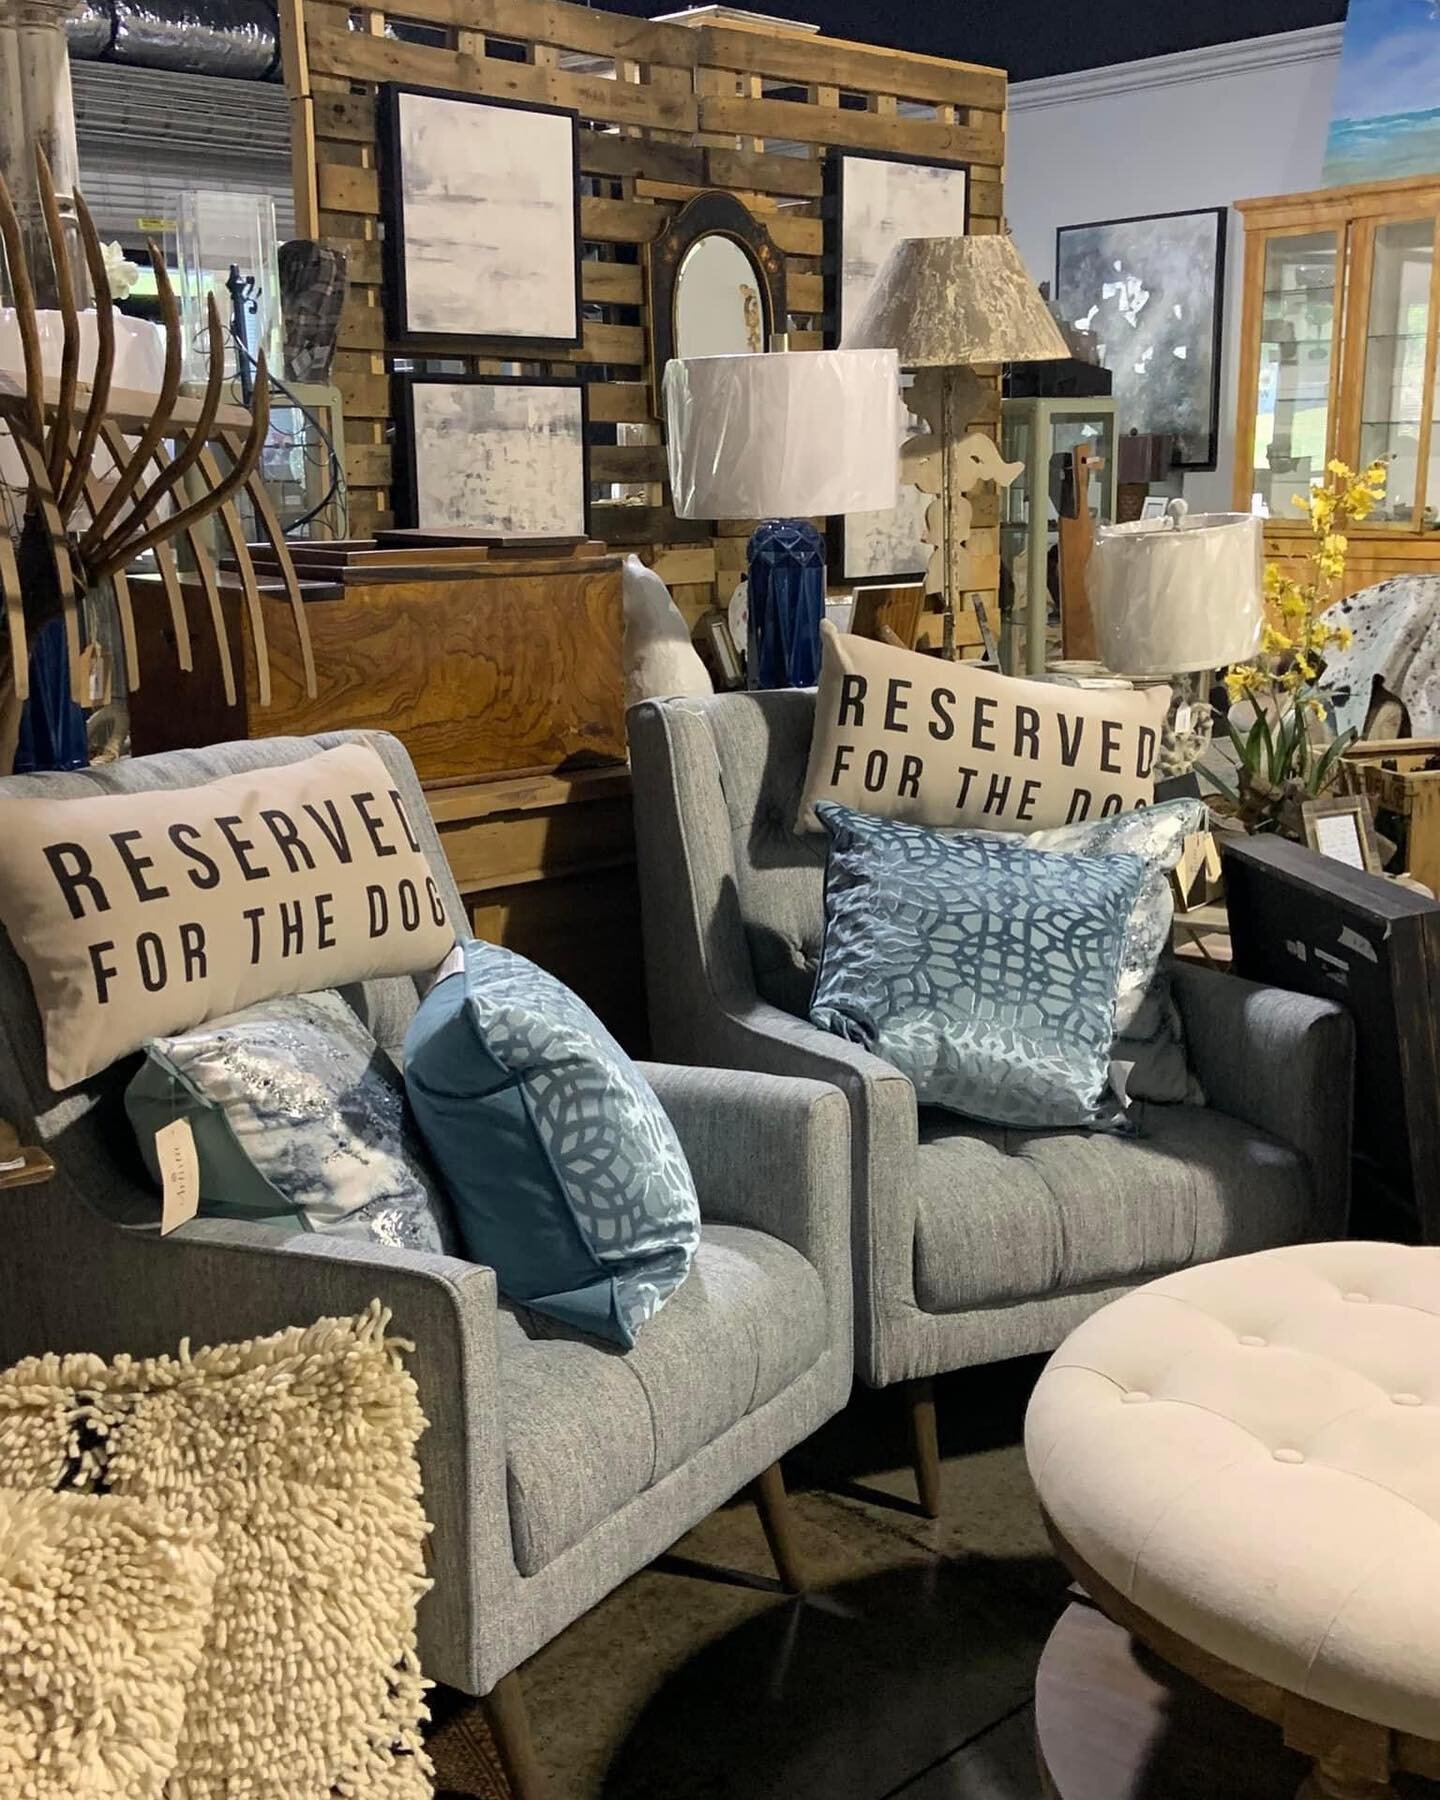 Don&rsquo;t miss this weekend&rsquo;s warehouse opening! 

We will be open both Saturday &amp; Sunday at our Cotton Row Weekends, 174 Collins Street Memphis TN location.  This will be the last open weekend until July 8th &amp; 9th.  So stop by and pi